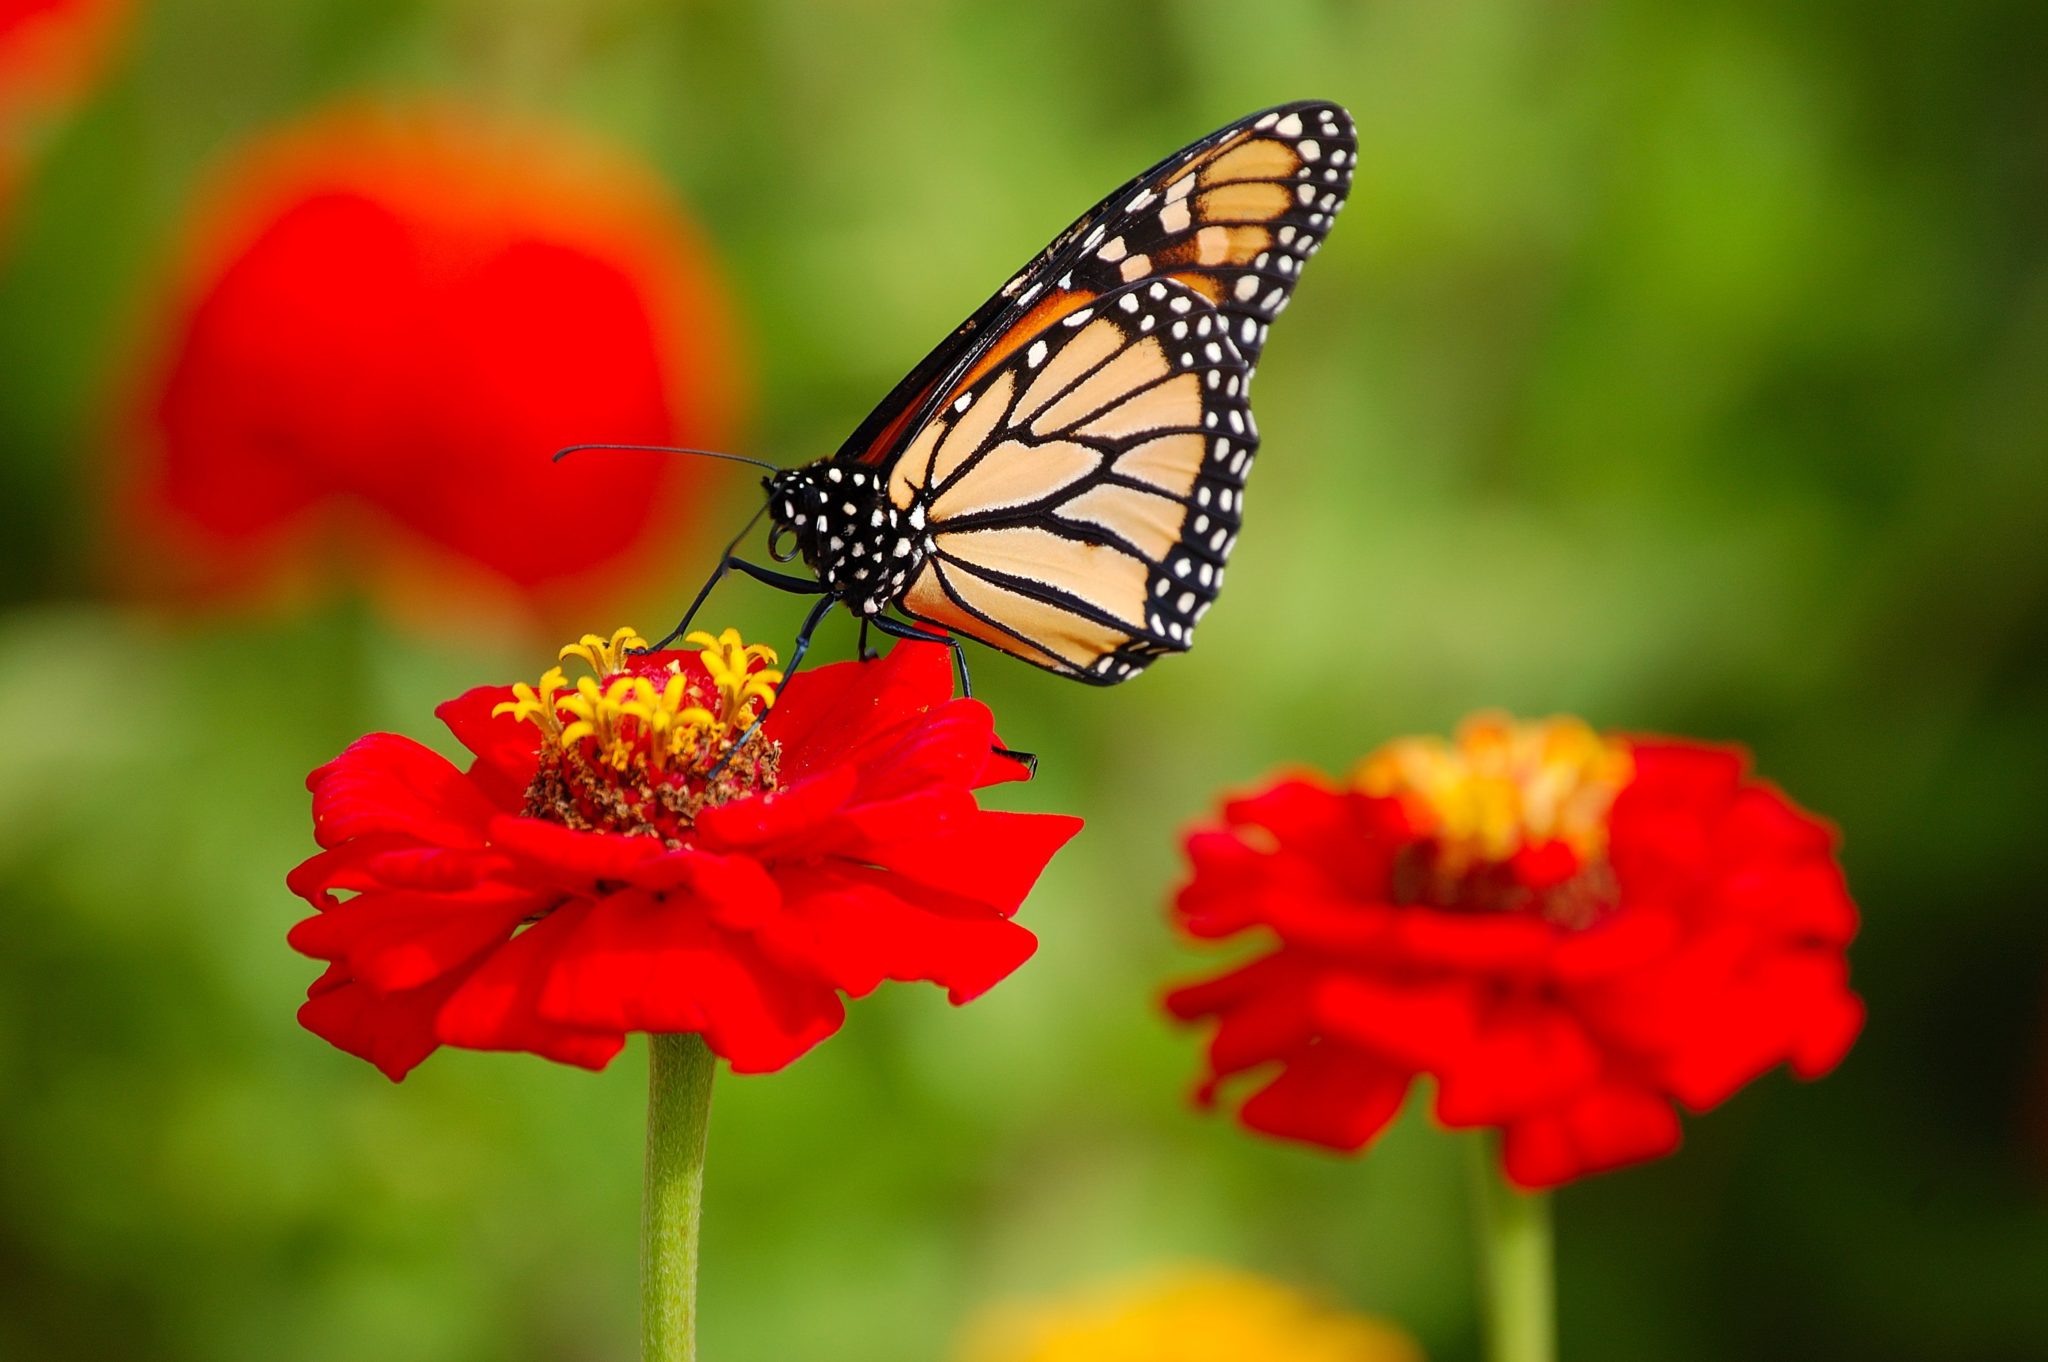 How to Attract Butterflies to Your Garden - Butterfly Gardening Tips